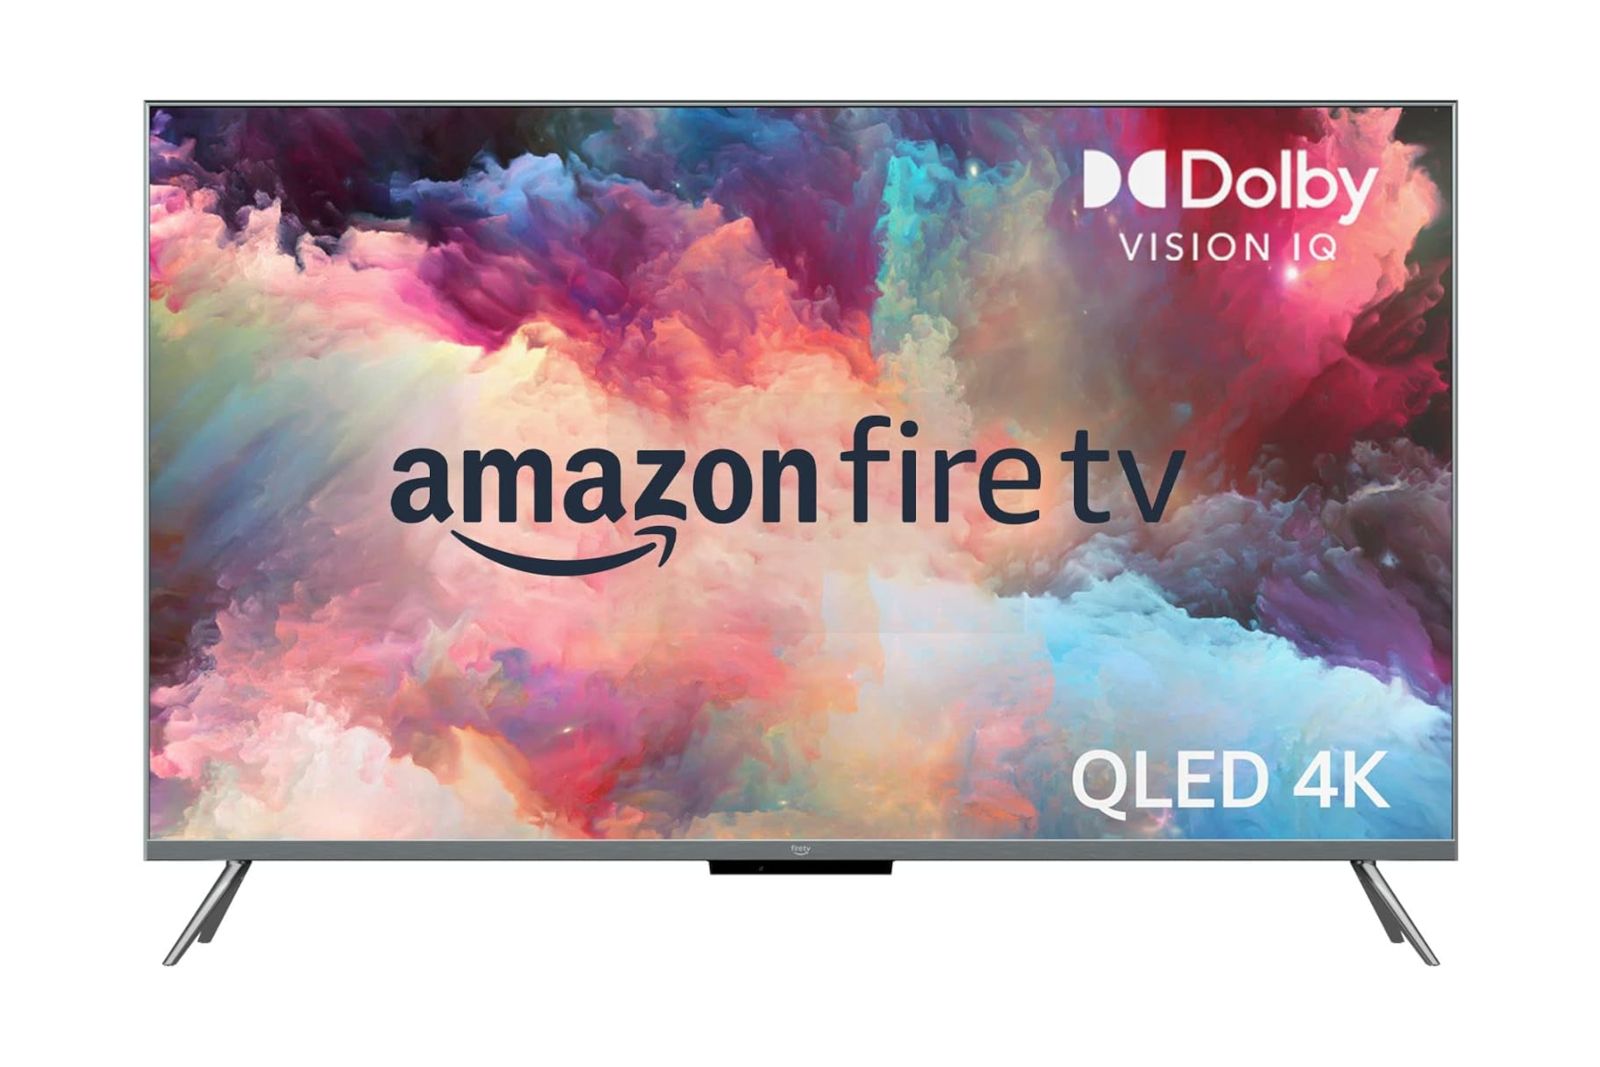 Amazon Fire TV 55 inch ambient experience smart tv